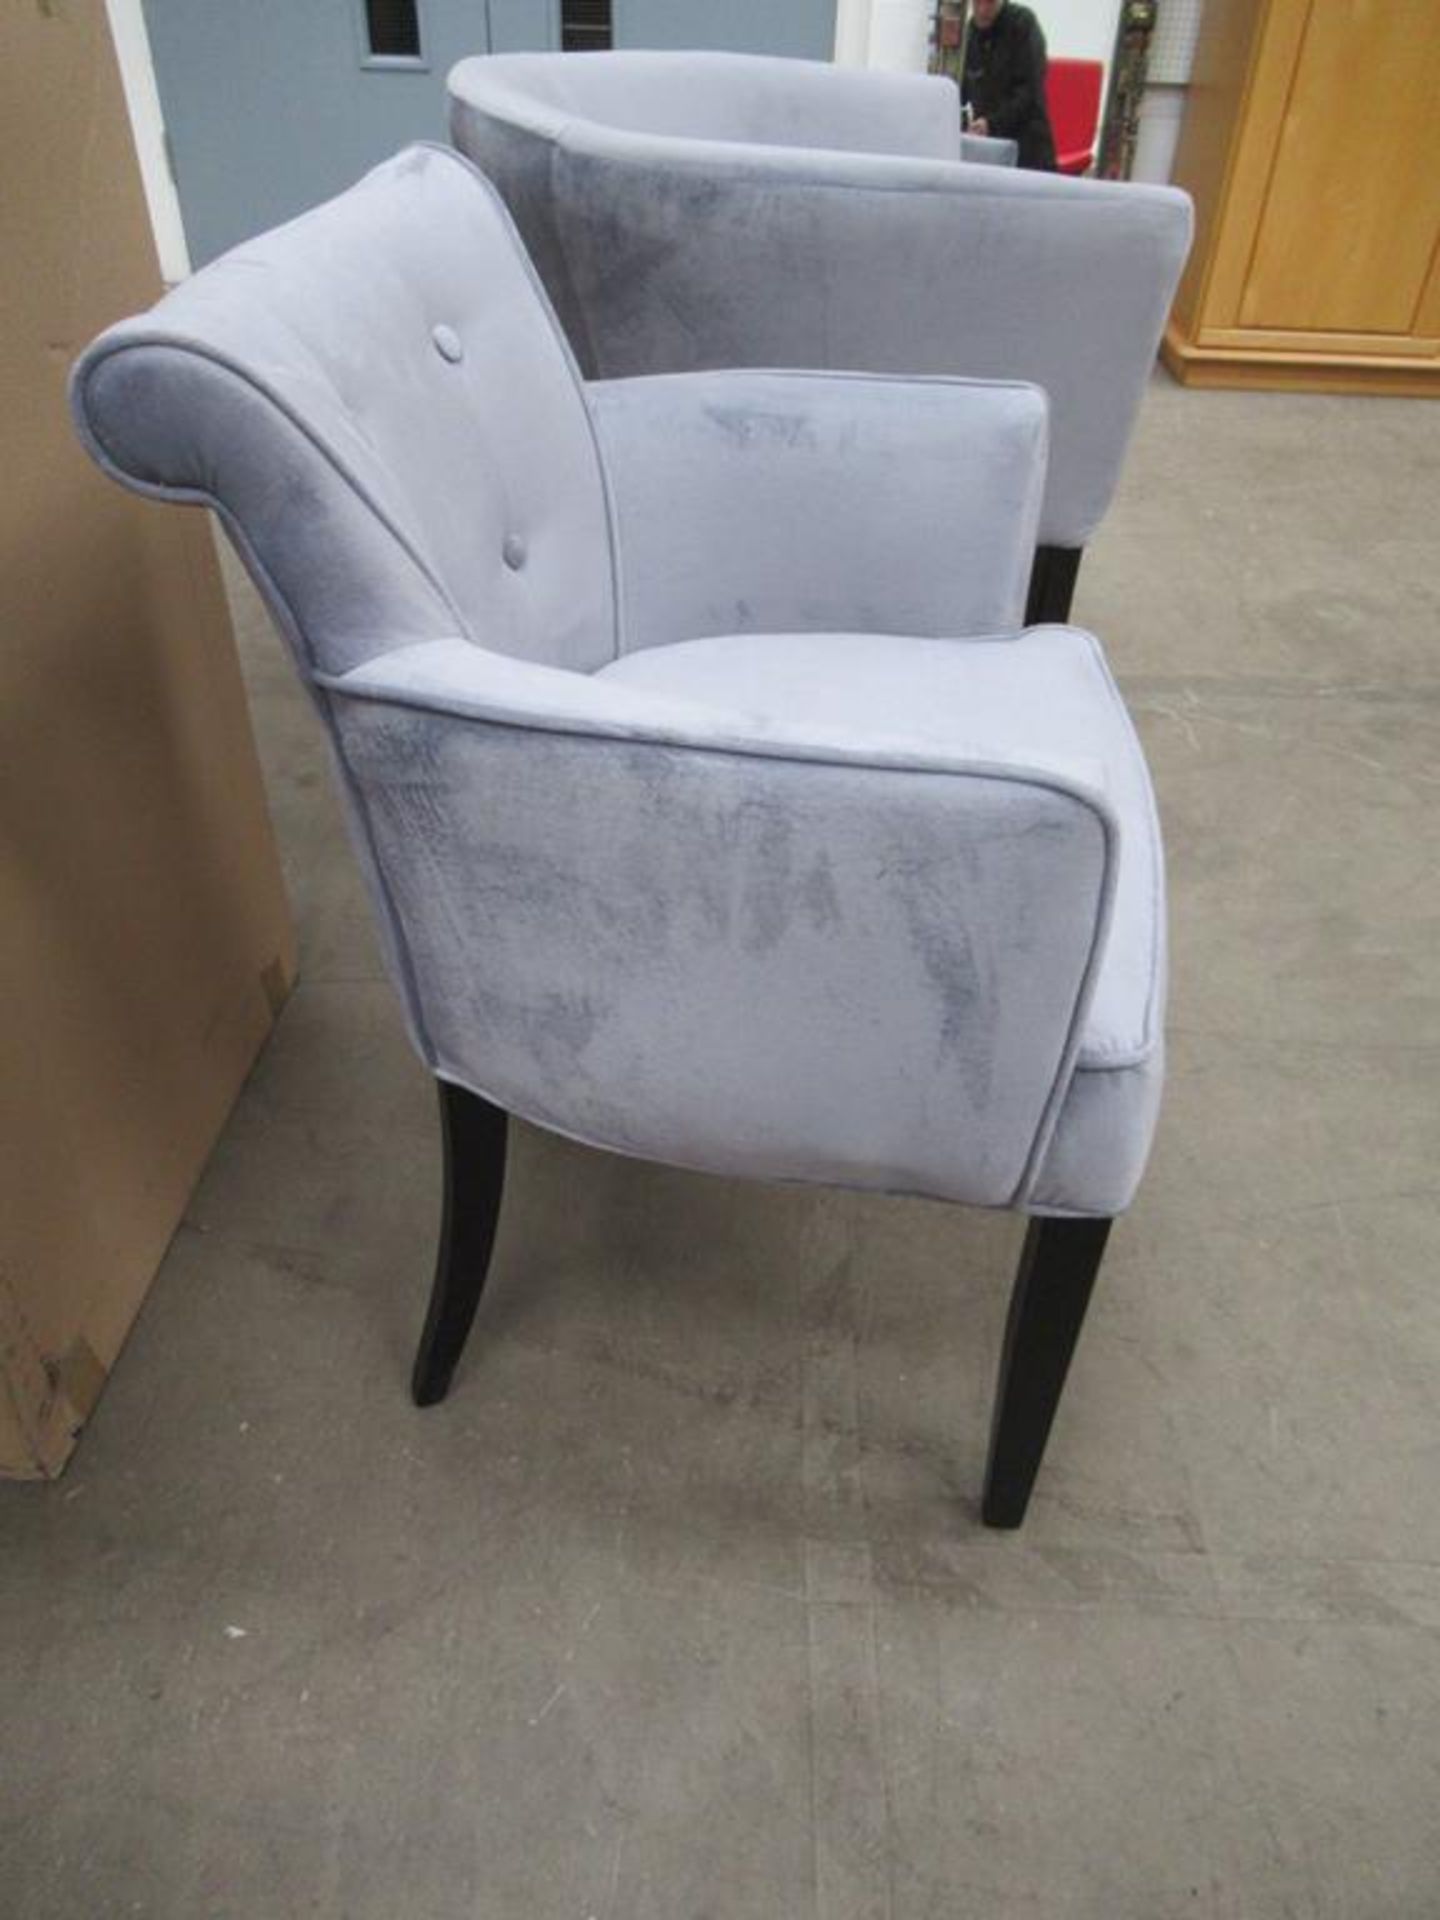 2 x Float Button Madison Tailor arm chairs - Image 3 of 3